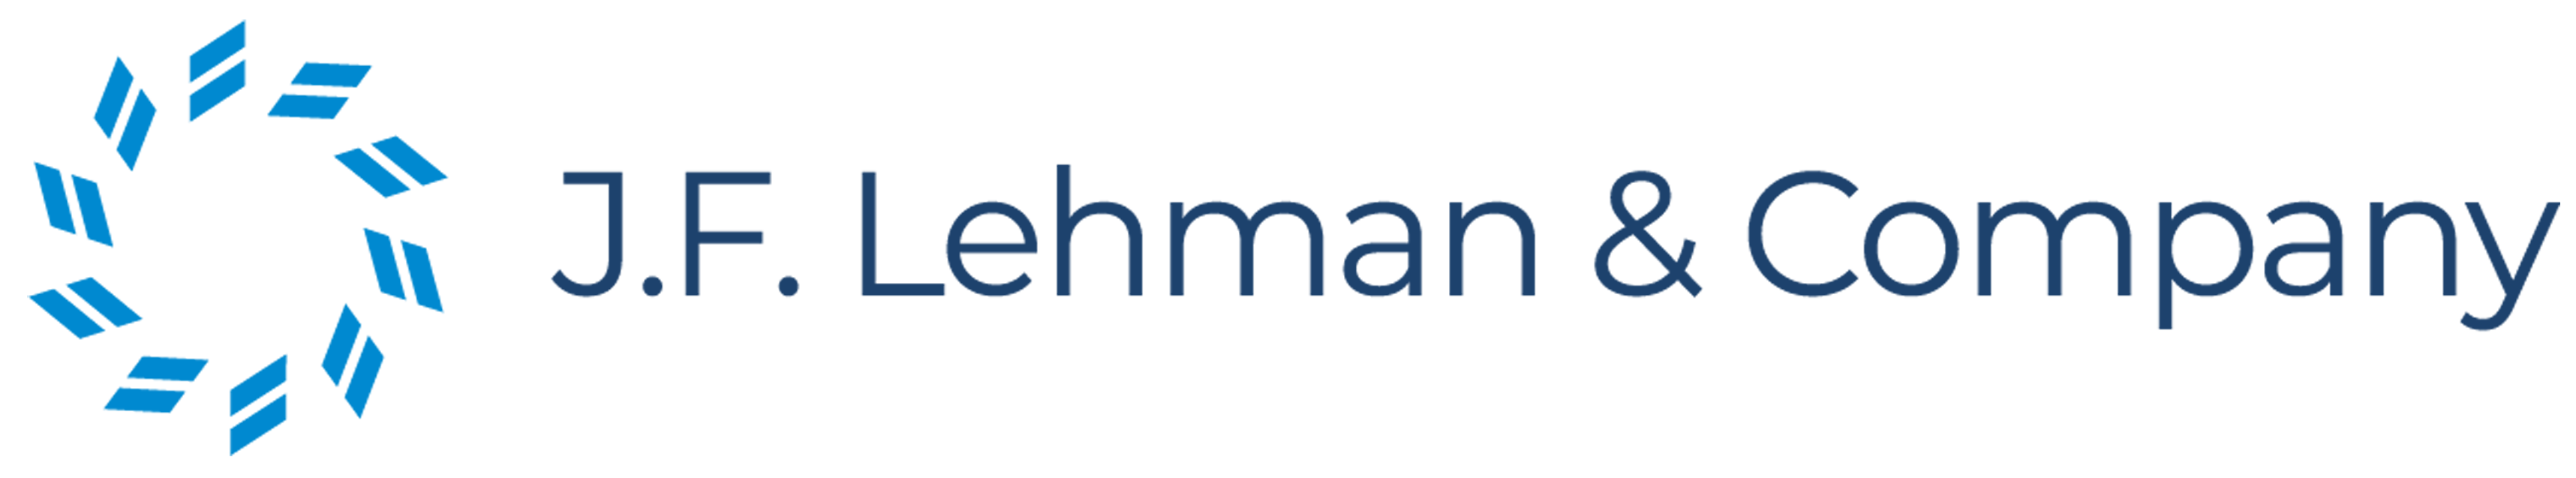 J.F. Lehman & Company Announces Promotions and Welcomes New Team Member, January 14 2021